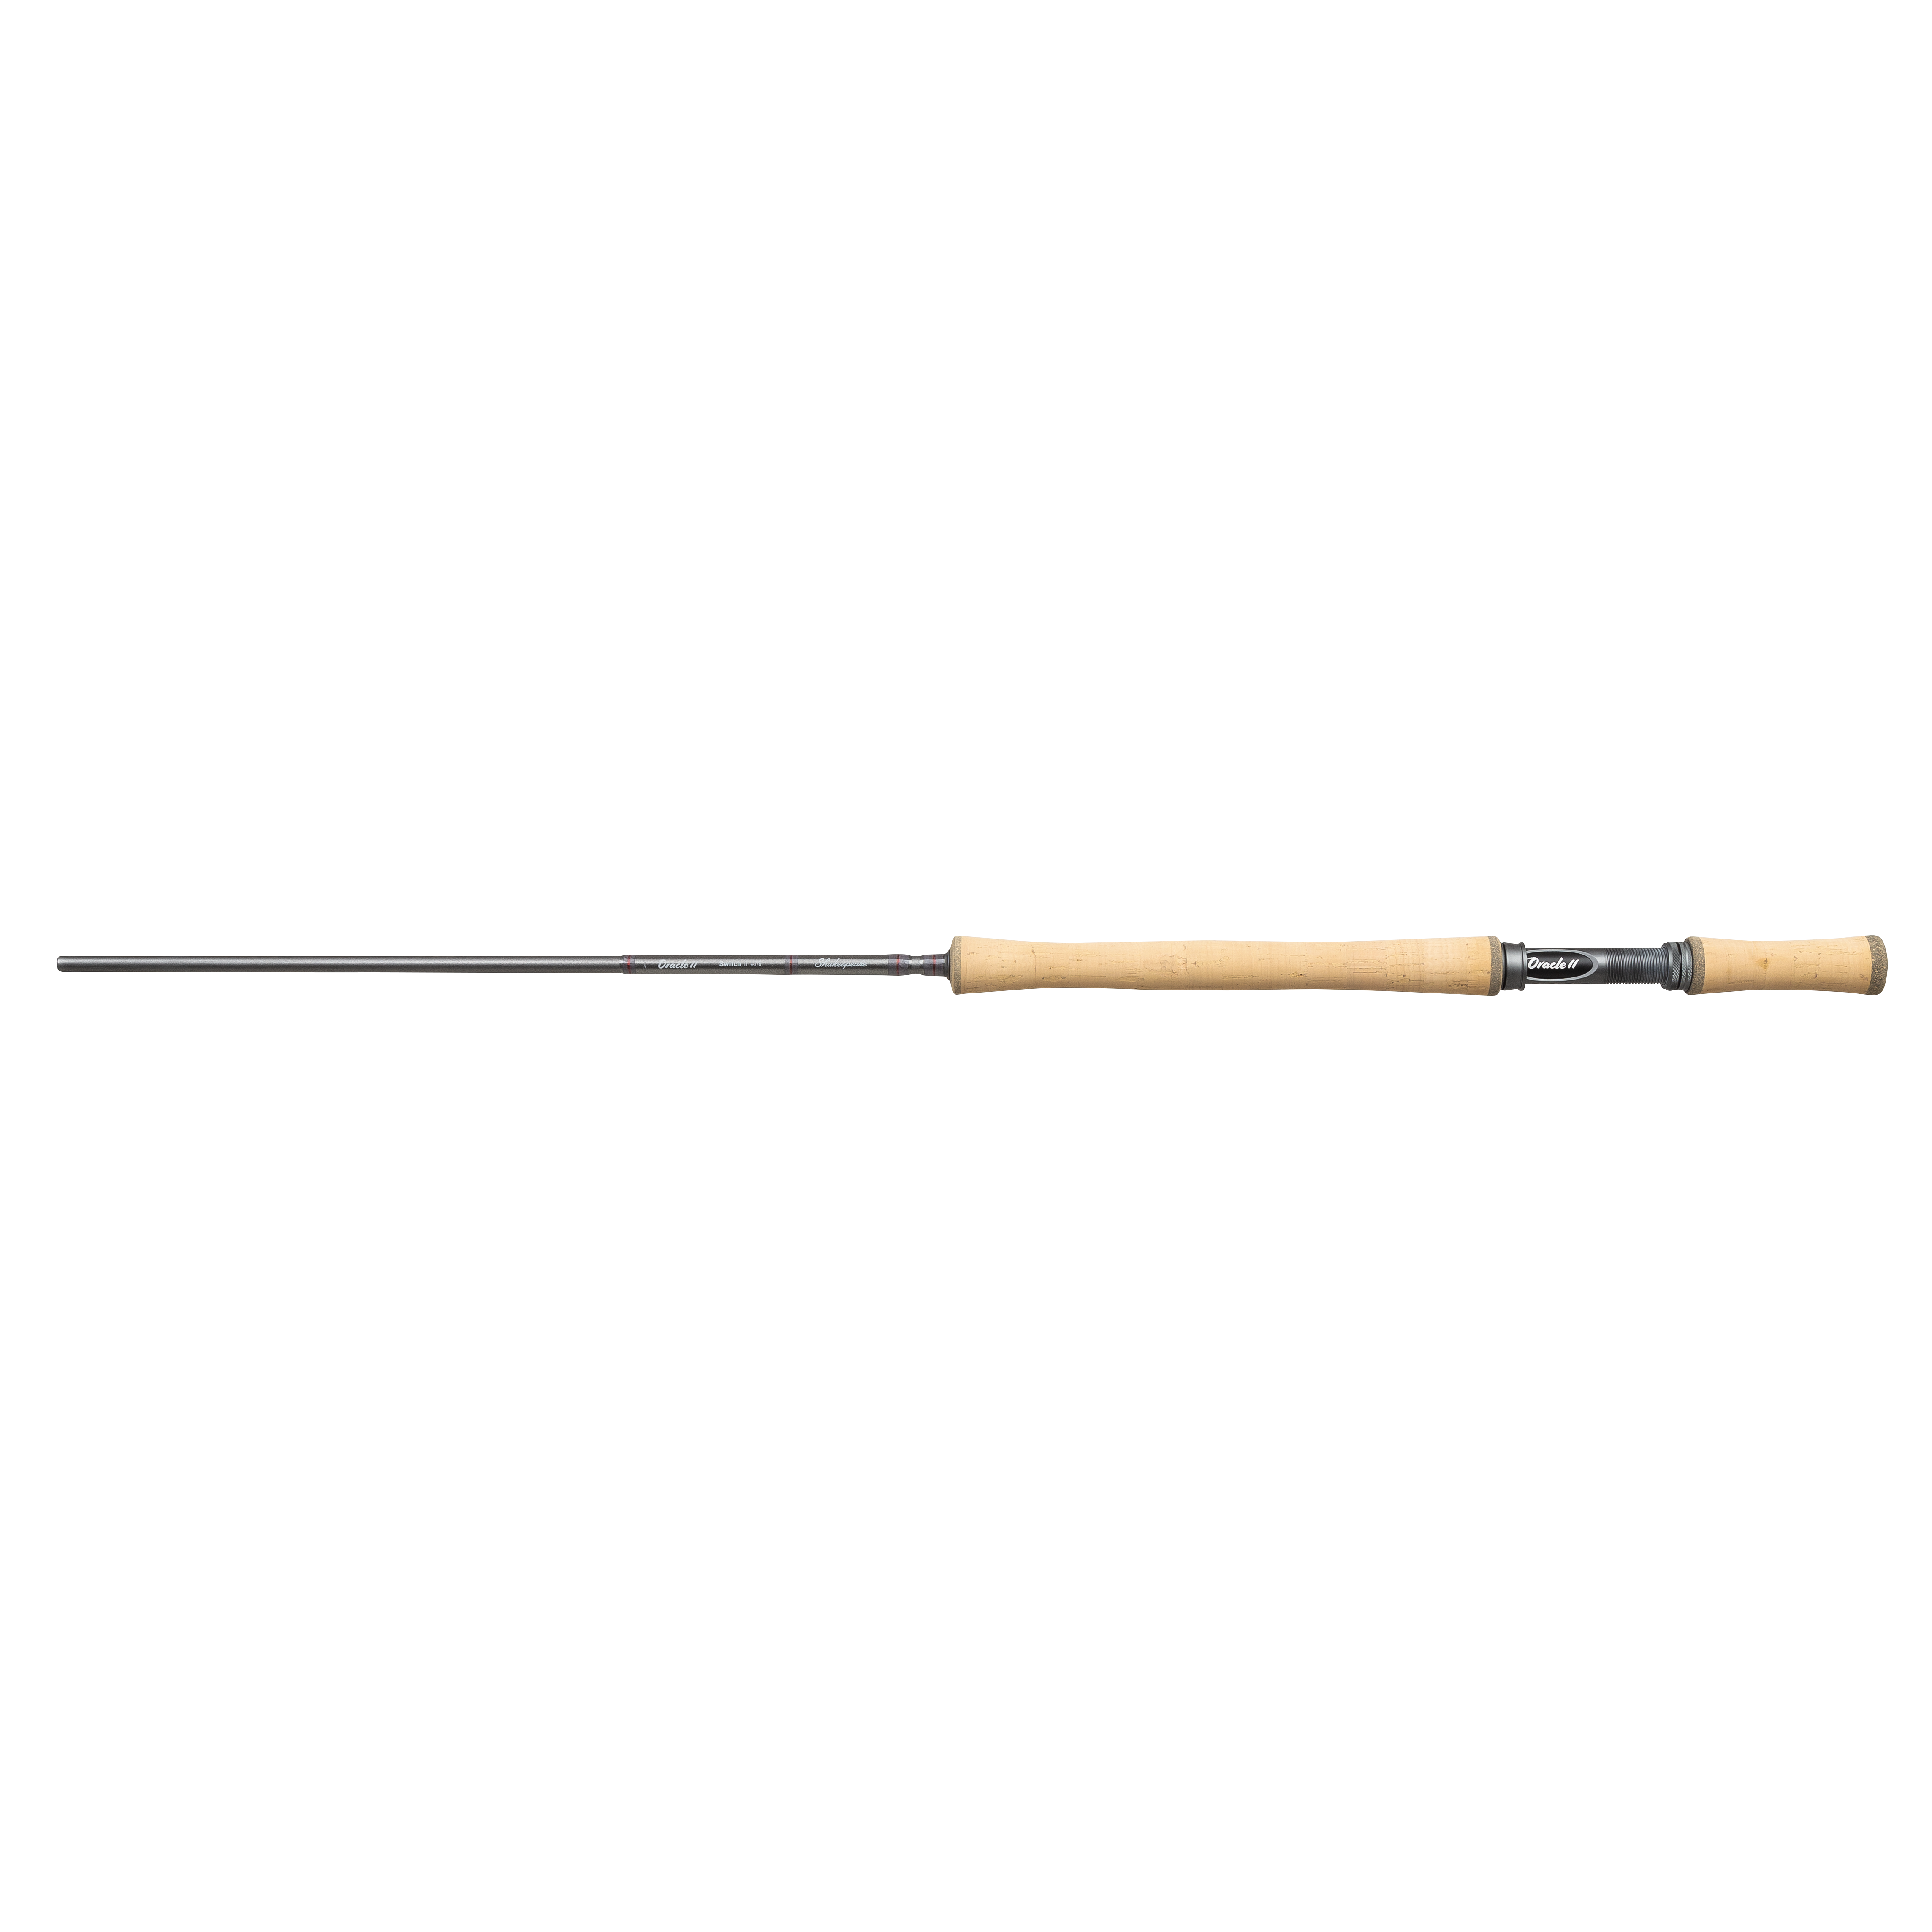 Shakespeare Oracle Spey Fly Rod #10/11 15ft 